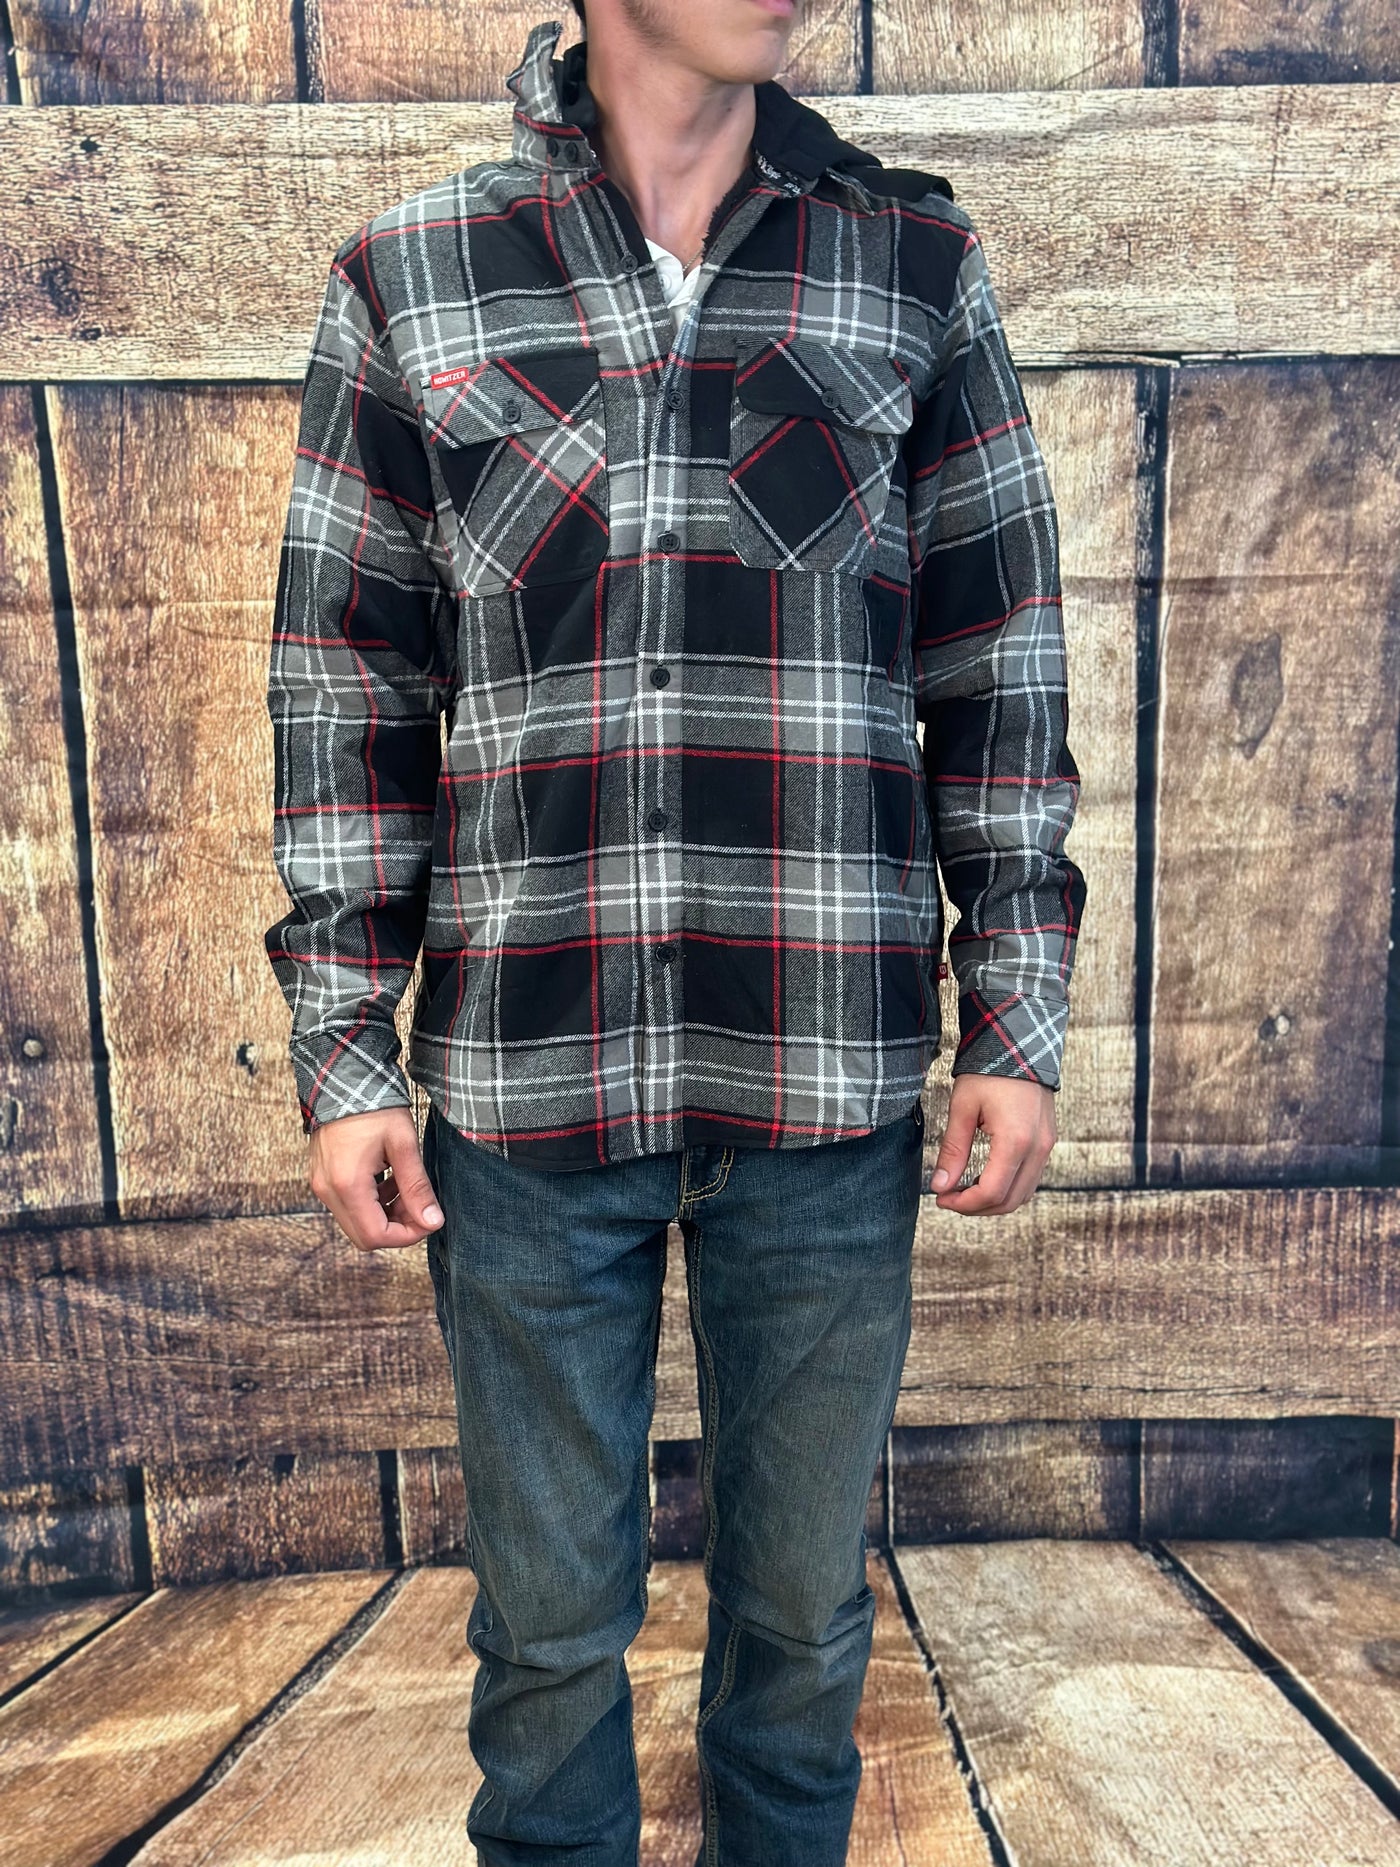 Howitzer "Blue Collar Patriot" Red and Black Plaid Hooded Flannel